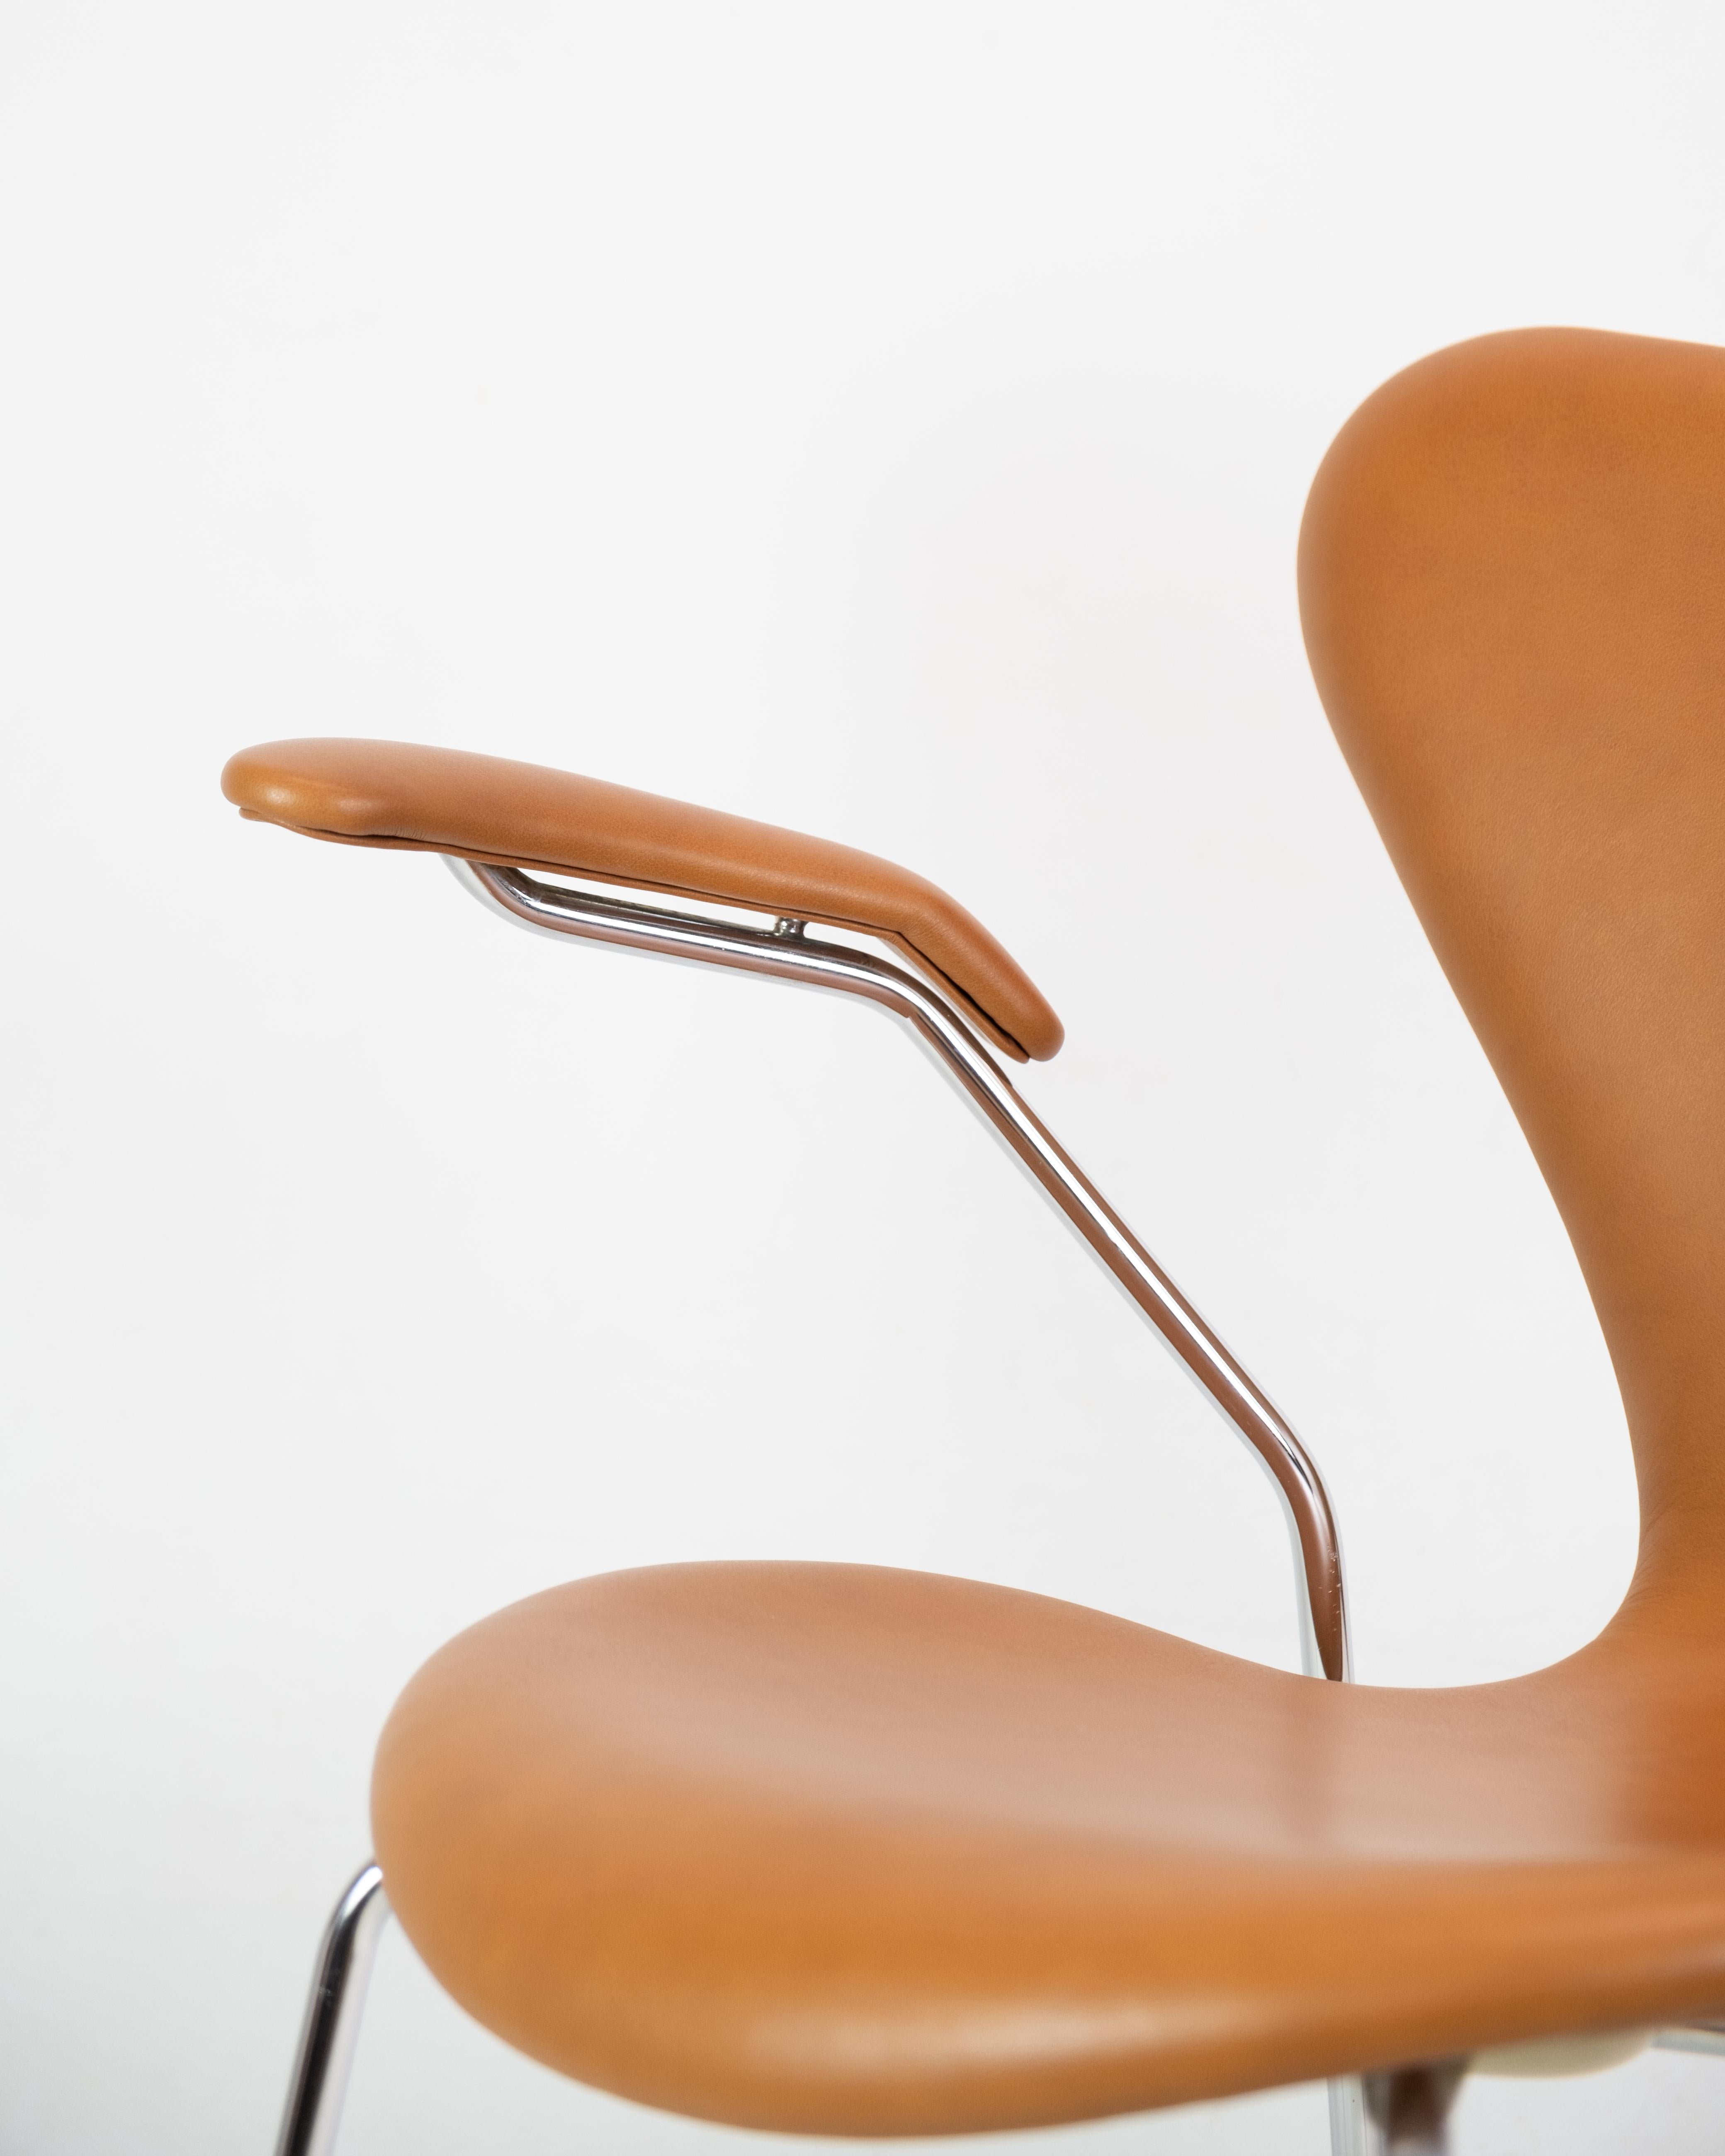 Mid-Century Modern Series Seven Chair Model 3207 of Cognac Leather by Arne Jacobsen  For Sale